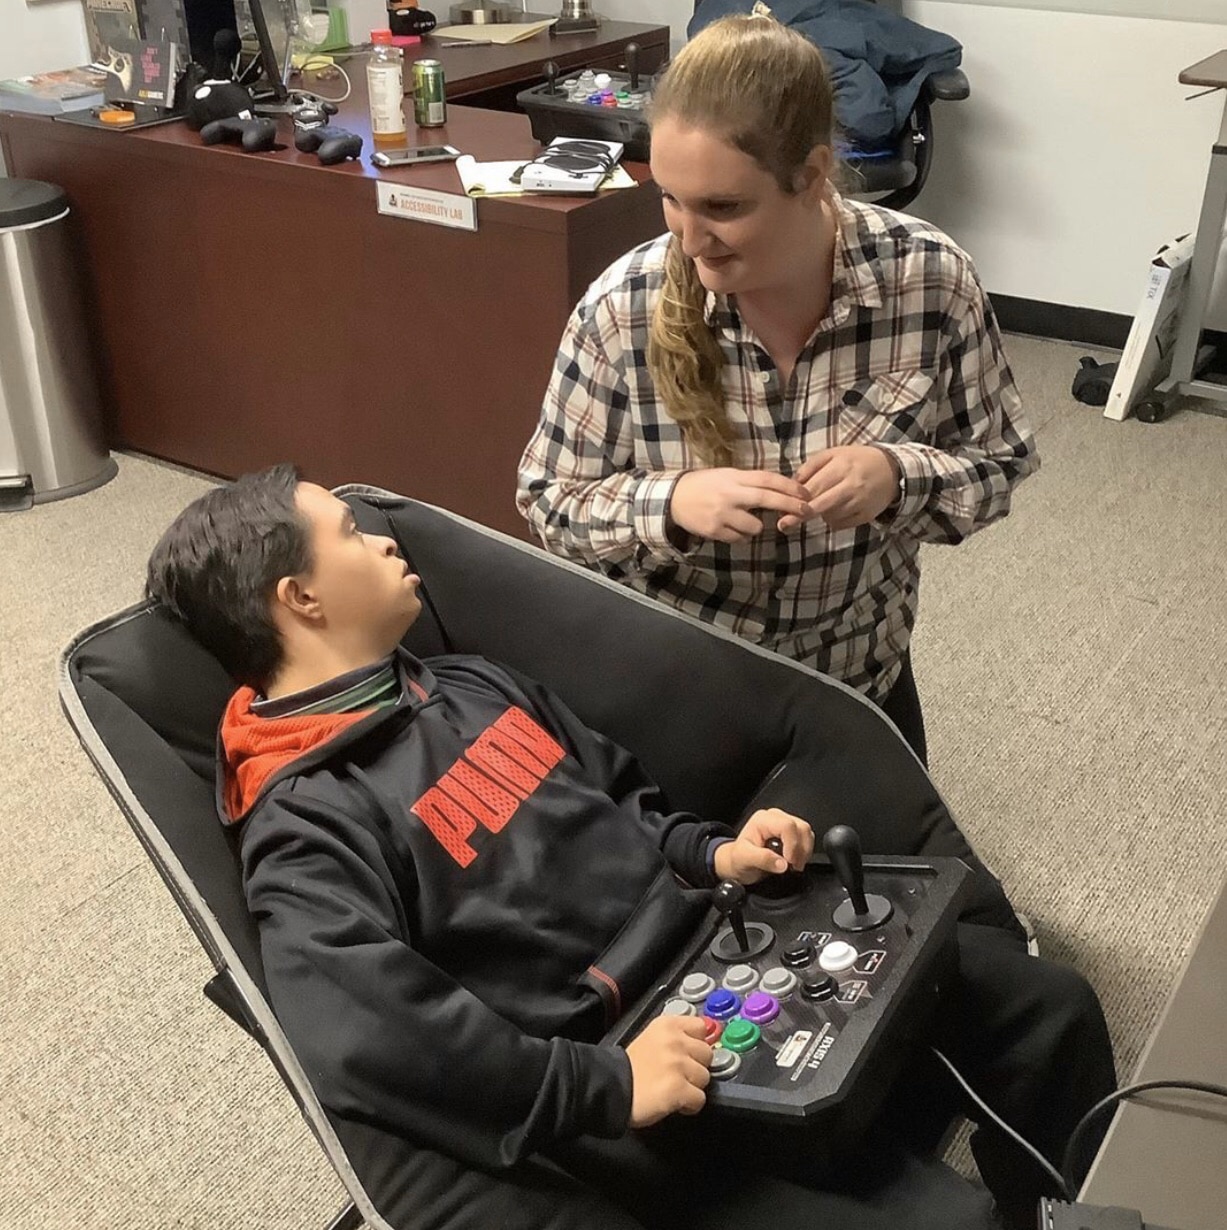 Two people, one is gaming using an accessible controller